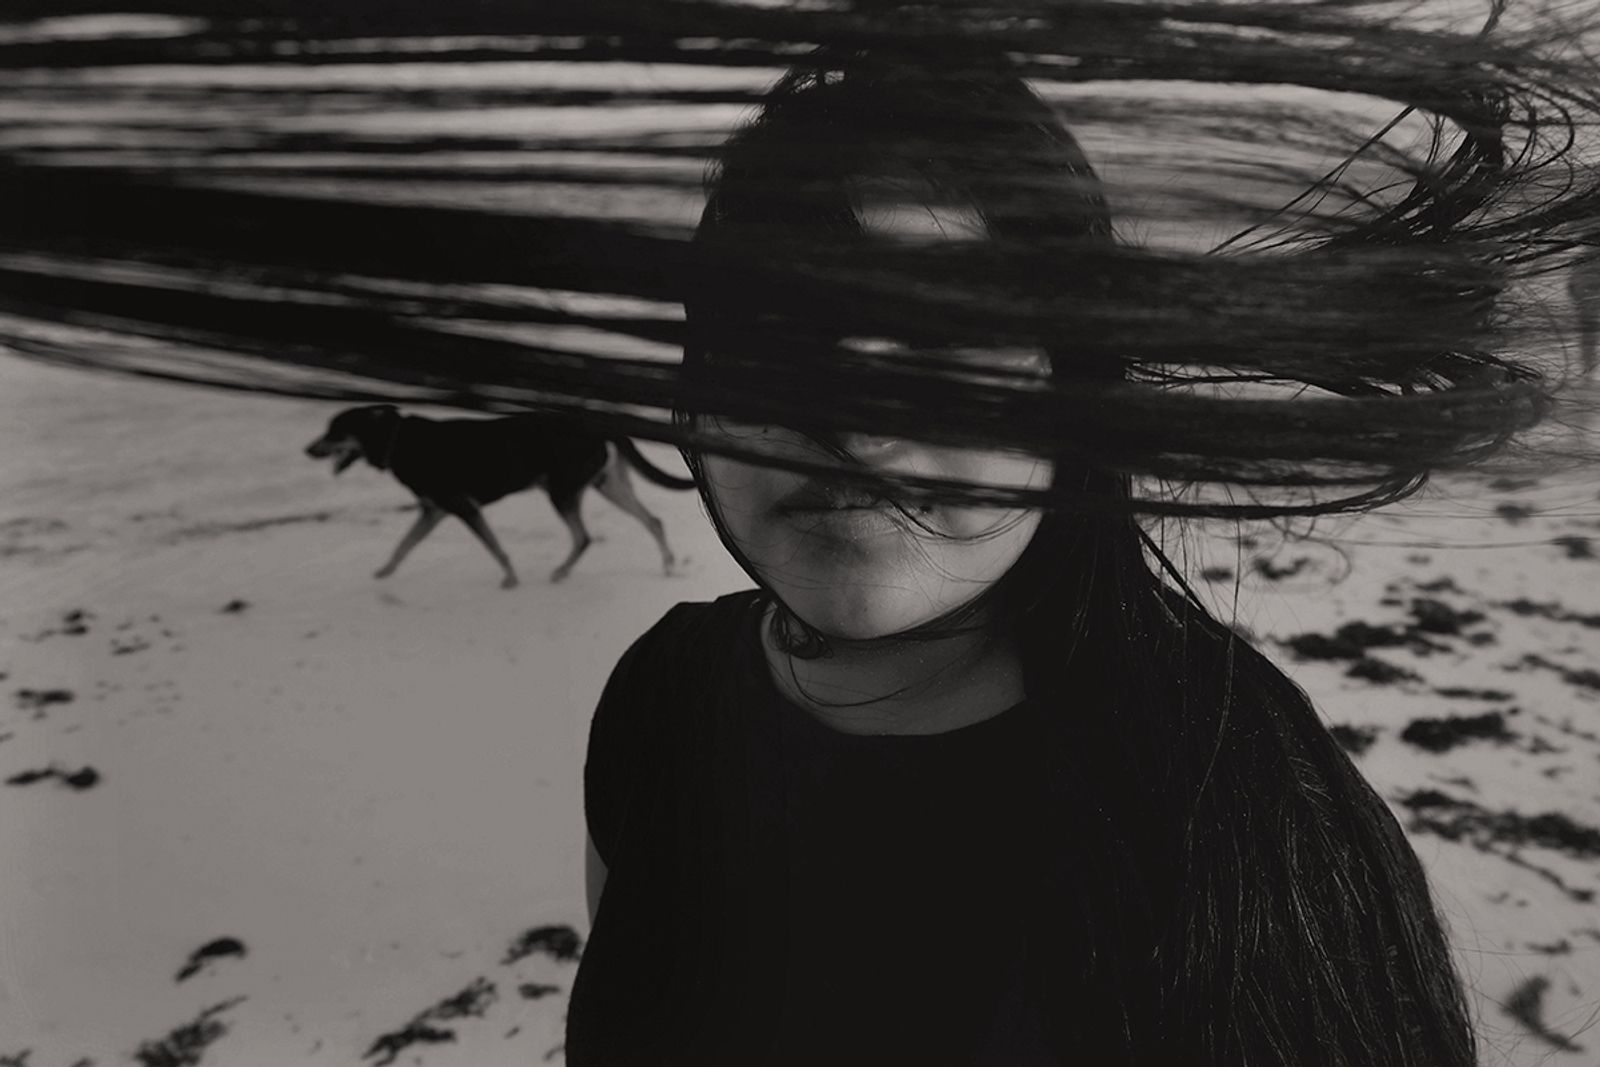 © Giulia Gatti - Image from the The wind blows on my mother photography project